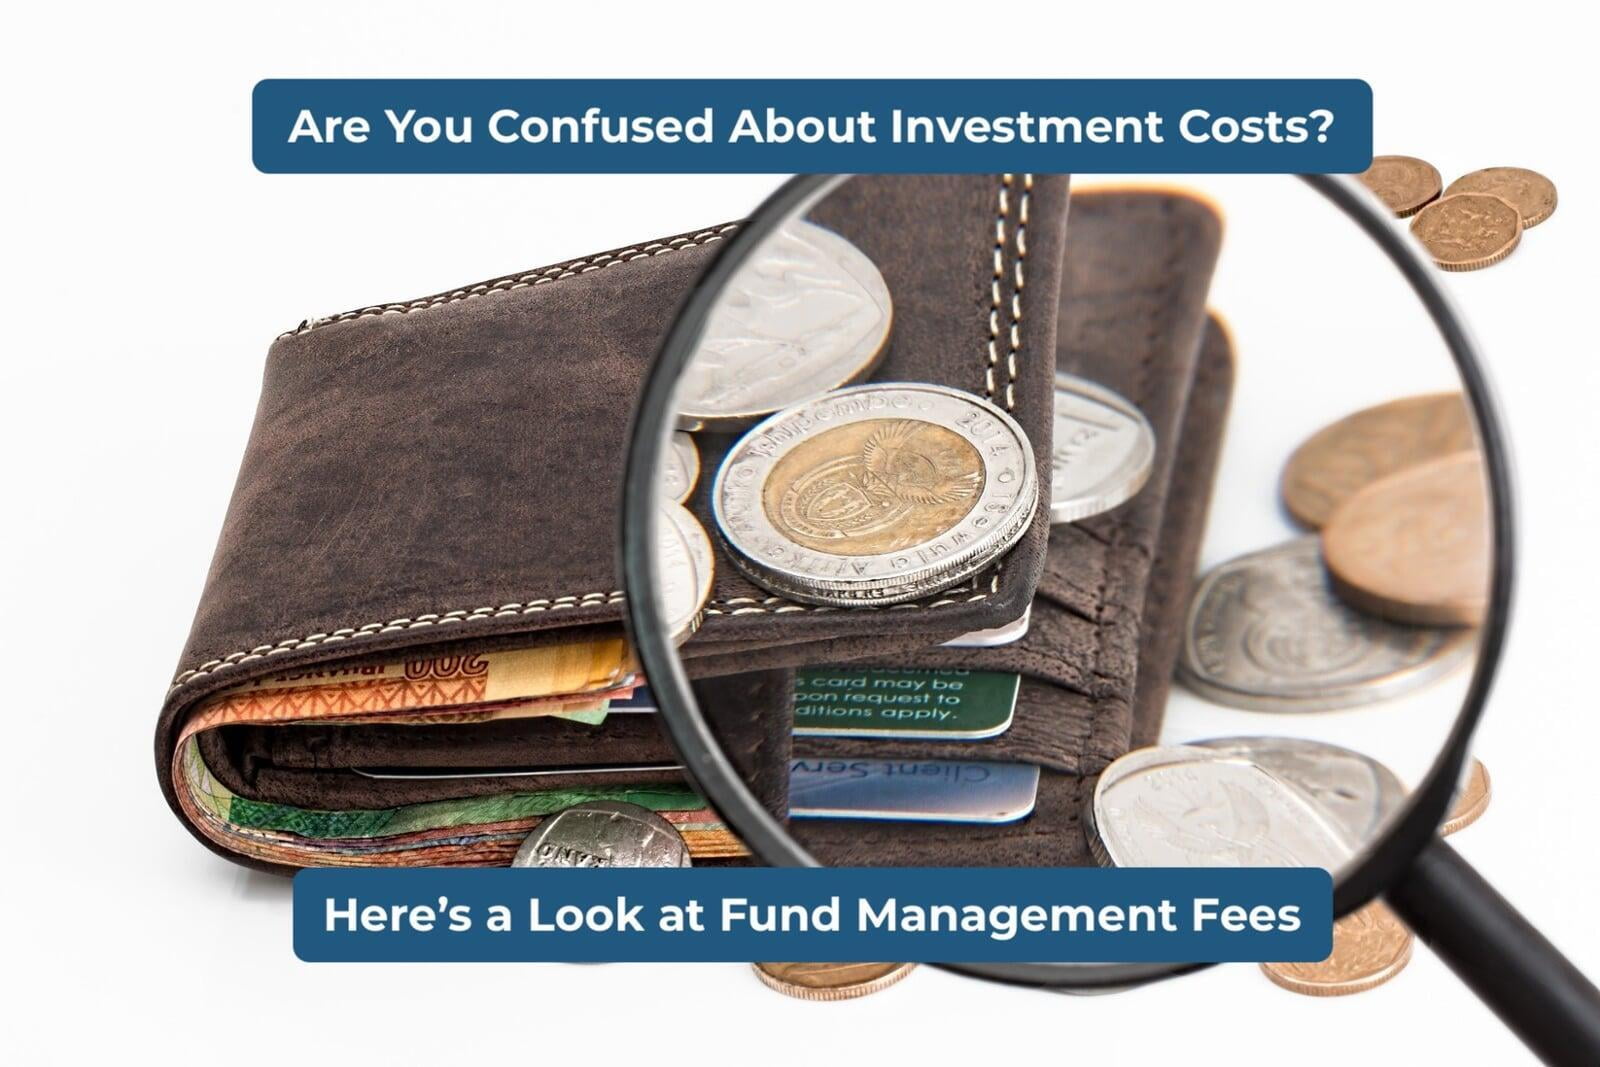 Are You Confused About Investment Costs? Part 1: Fund Management Fees